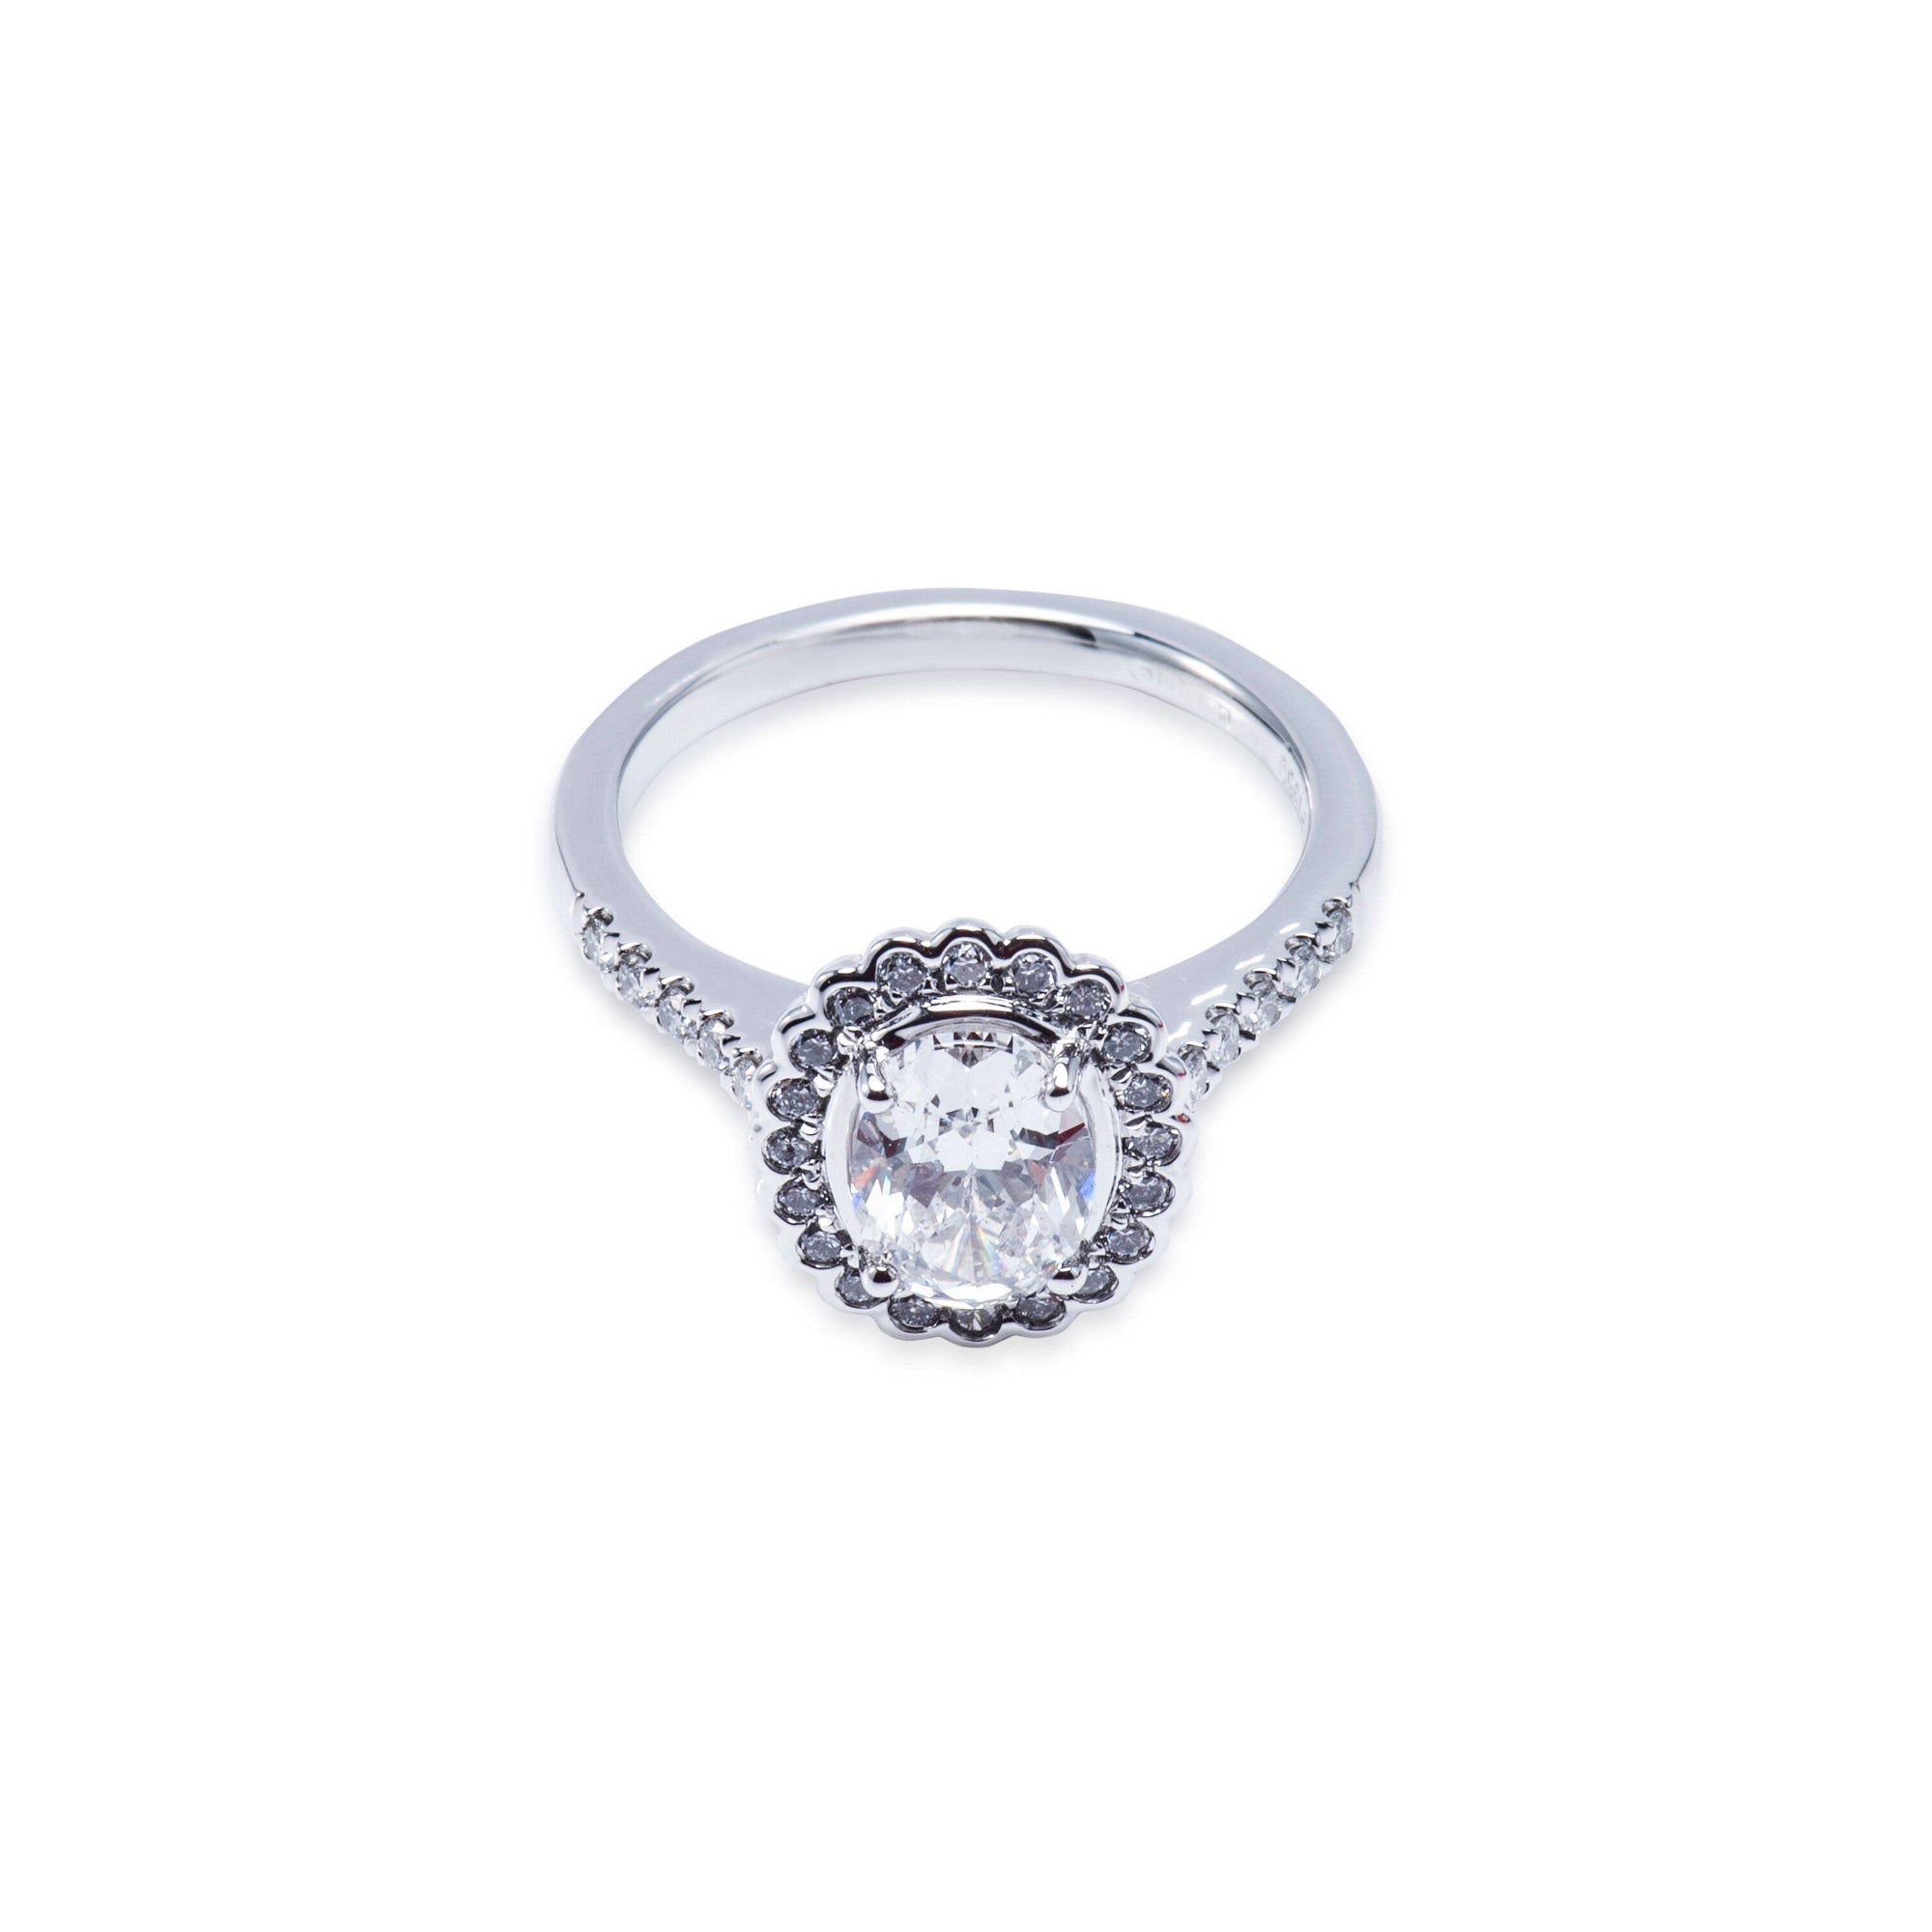 Platinum diamond oval shape halo style engagement ring with diamond shoulders Aces Jewellers 